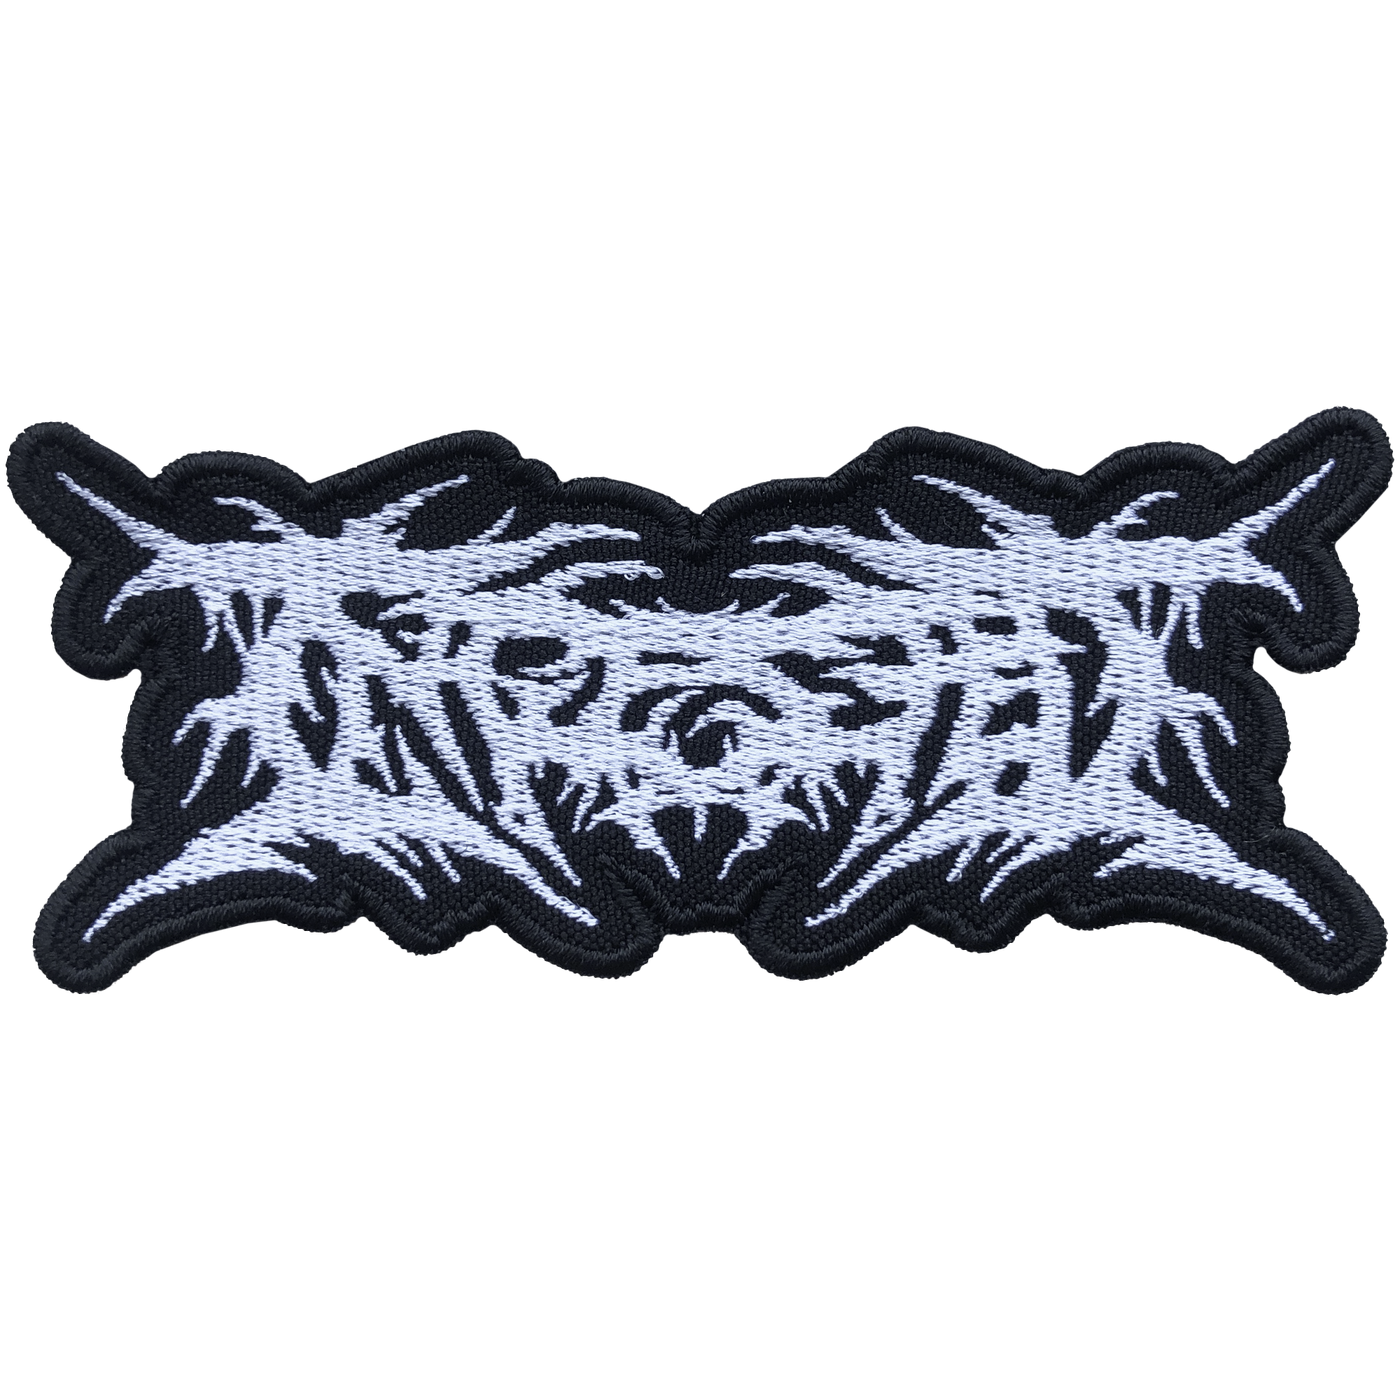 Ingested Patches